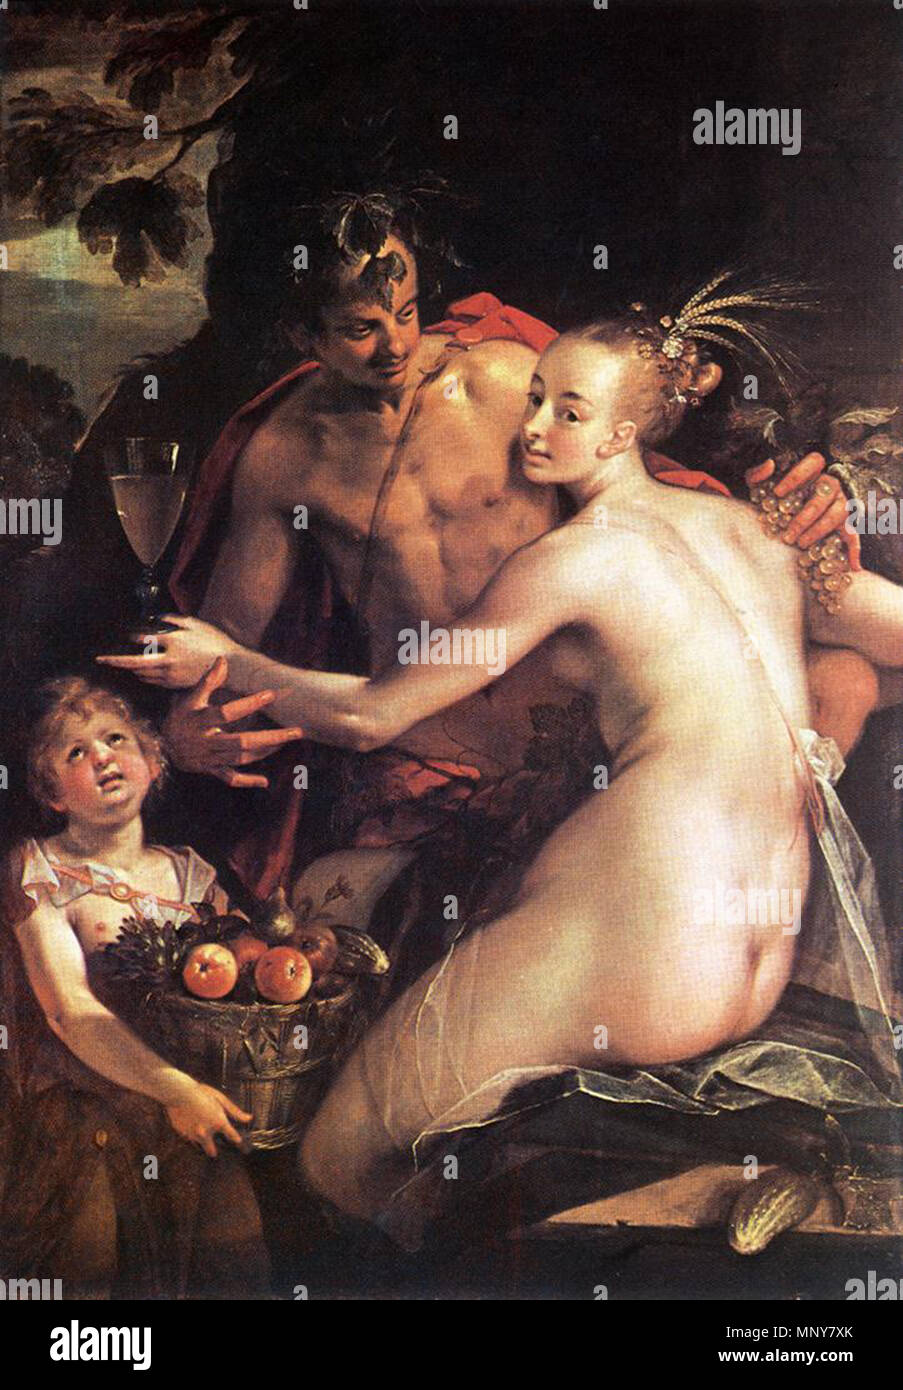 English: Bacchus, Ceres and Cupid   first half of 17th century.   1245 AACHEN, Hans von - Bacchus, Ceres and Cupid - WGA Stock Photo